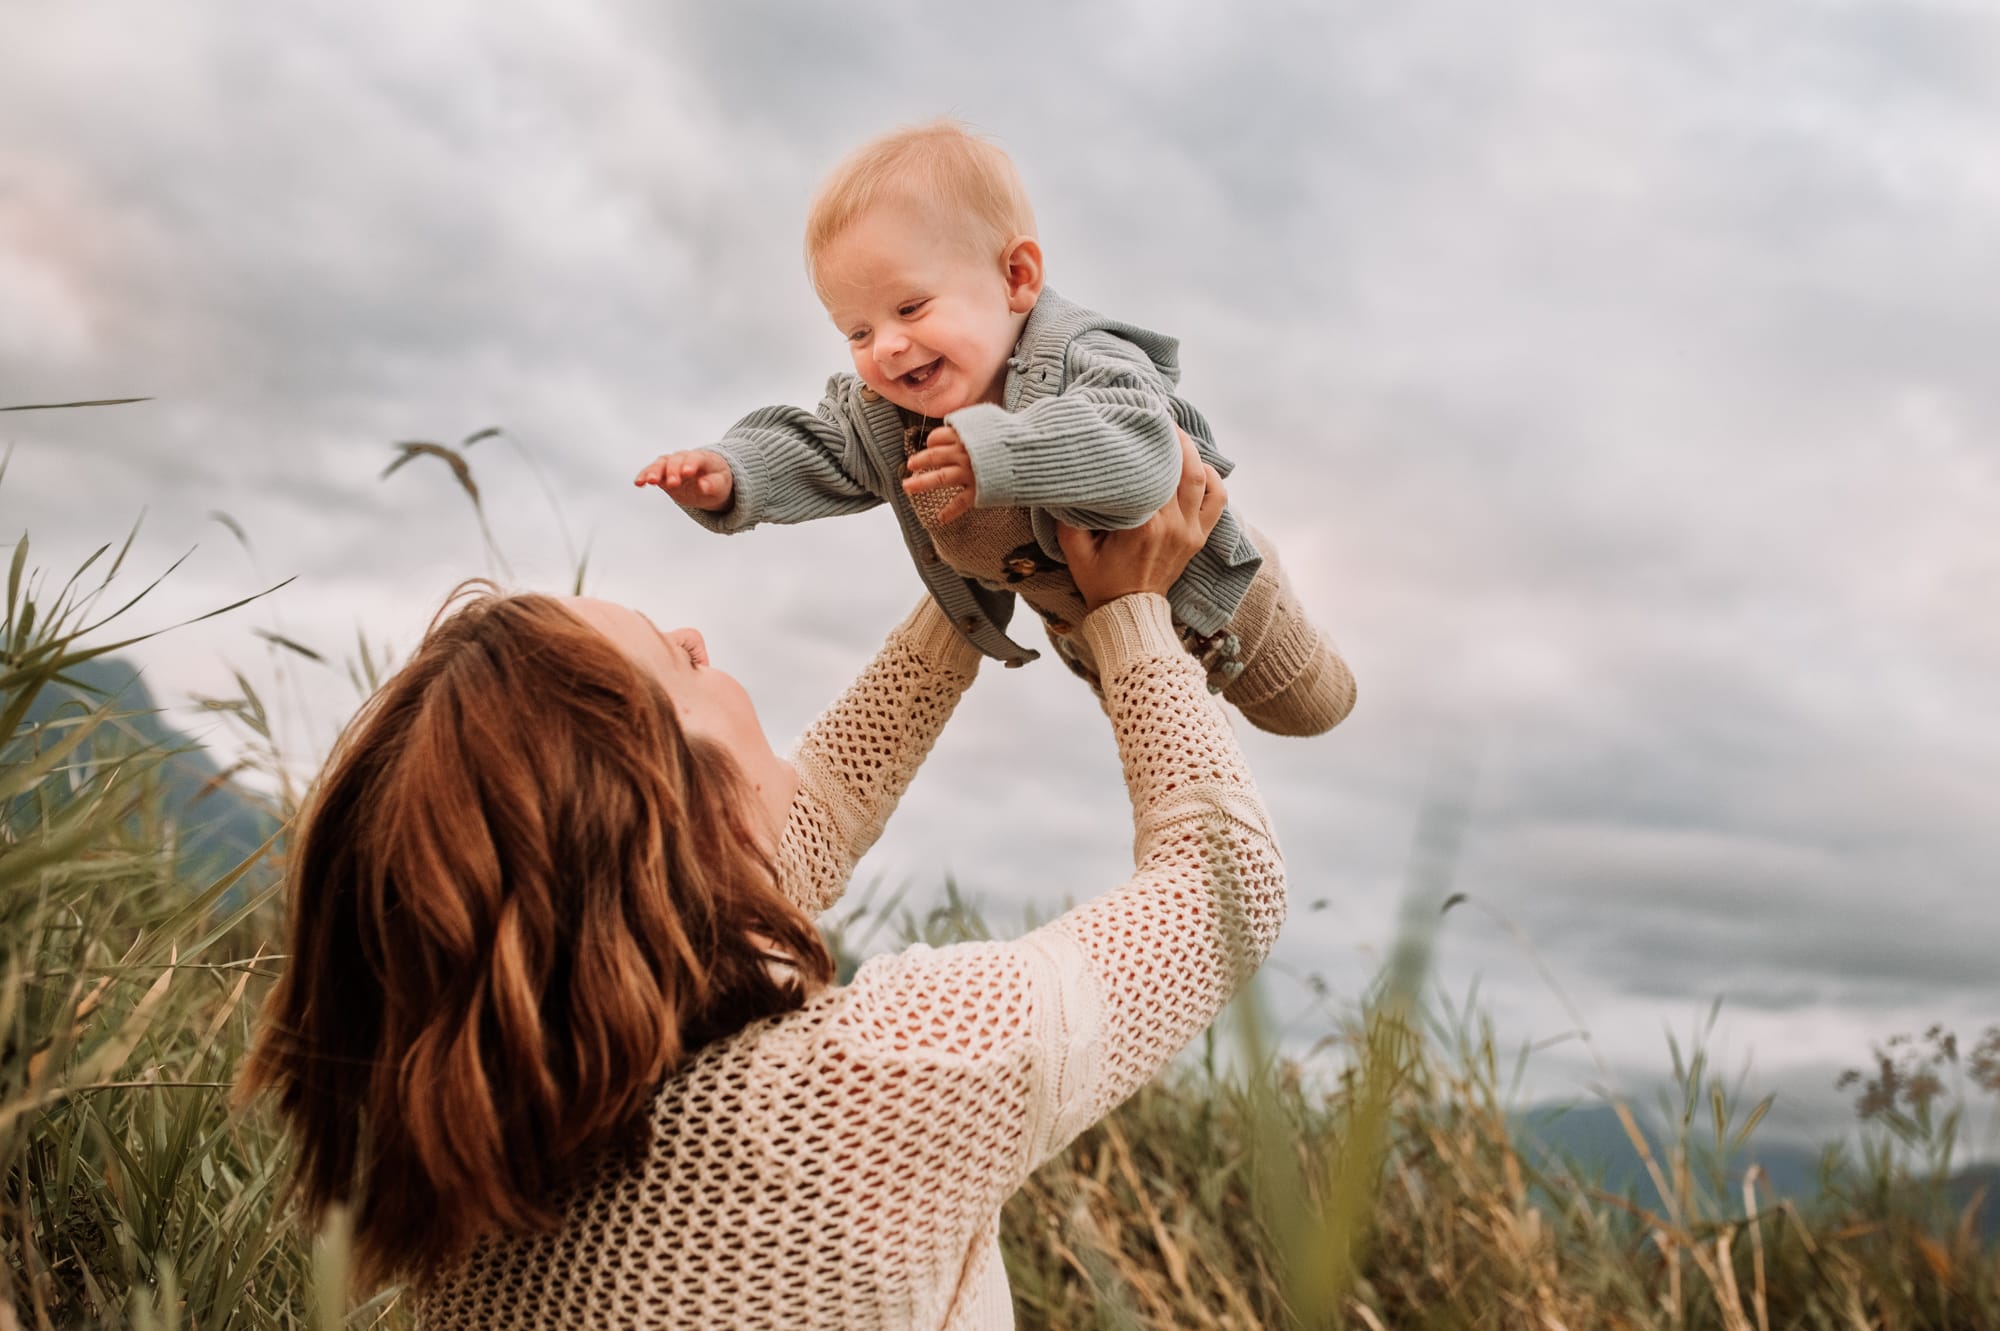 Mom lets her toddler boy fly high above her in Pitt Meadows family photo.